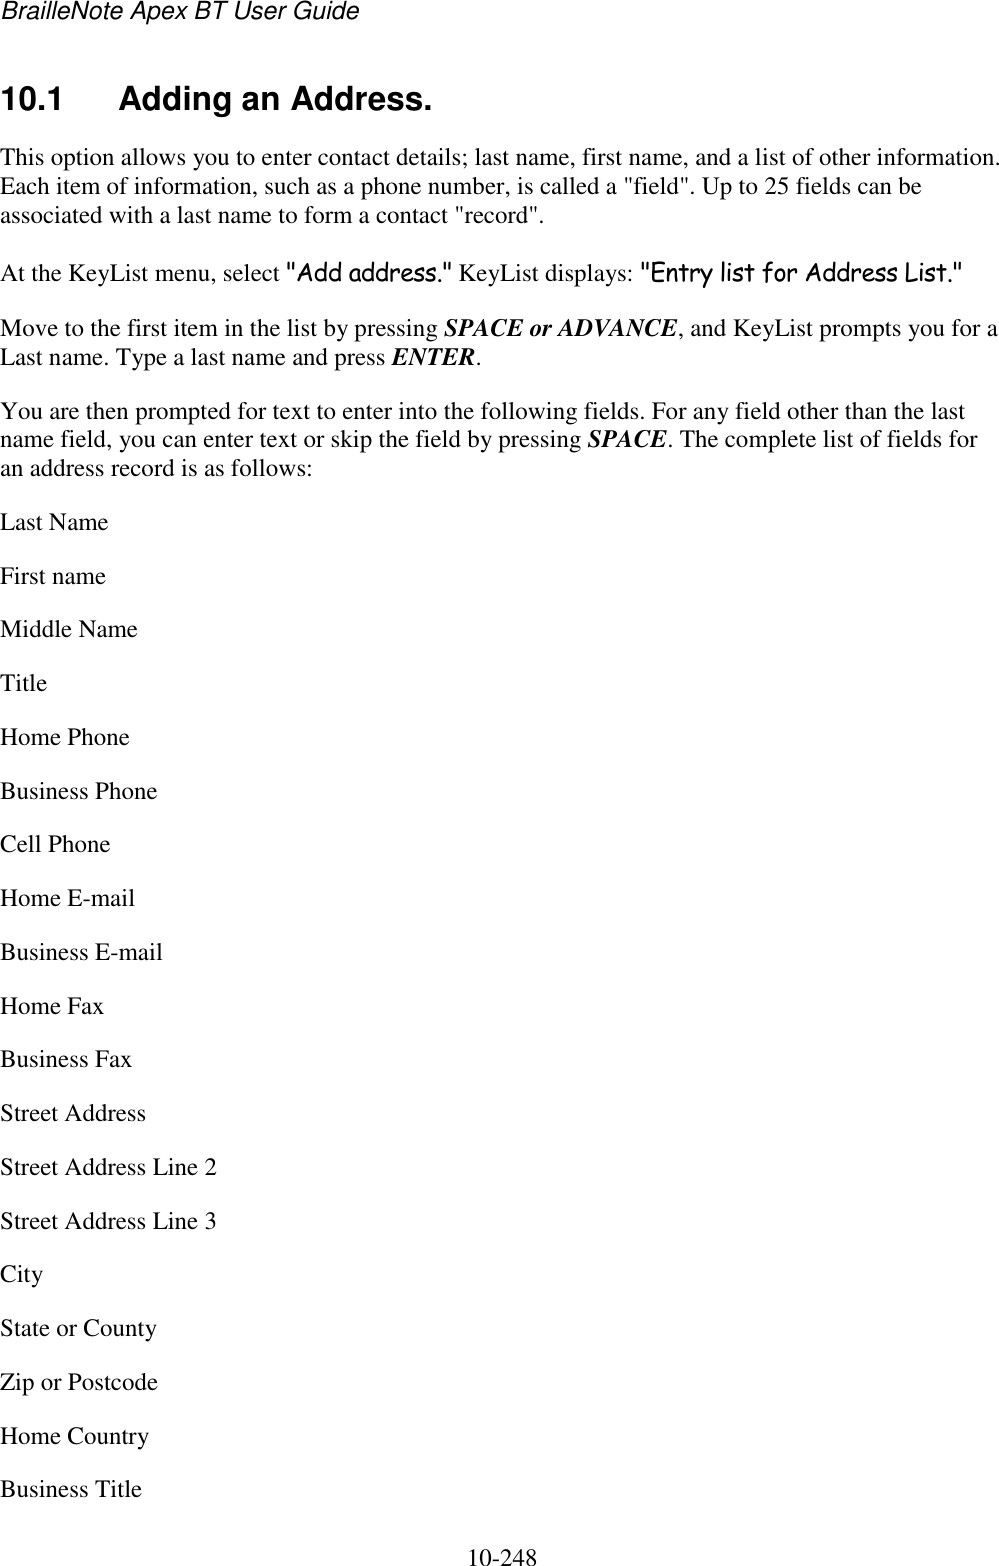 BrailleNote Apex BT User Guide   10-248   10.1  Adding an Address. This option allows you to enter contact details; last name, first name, and a list of other information. Each item of information, such as a phone number, is called a &quot;field&quot;. Up to 25 fields can be associated with a last name to form a contact &quot;record&quot;. At the KeyList menu, select &quot;Add address.&quot; KeyList displays: &quot;Entry list for Address List.&quot; Move to the first item in the list by pressing SPACE or ADVANCE, and KeyList prompts you for a Last name. Type a last name and press ENTER. You are then prompted for text to enter into the following fields. For any field other than the last name field, you can enter text or skip the field by pressing SPACE. The complete list of fields for an address record is as follows: Last Name First name Middle Name Title Home Phone Business Phone Cell Phone Home E-mail Business E-mail Home Fax Business Fax Street Address Street Address Line 2 Street Address Line 3 City State or County Zip or Postcode Home Country Business Title 